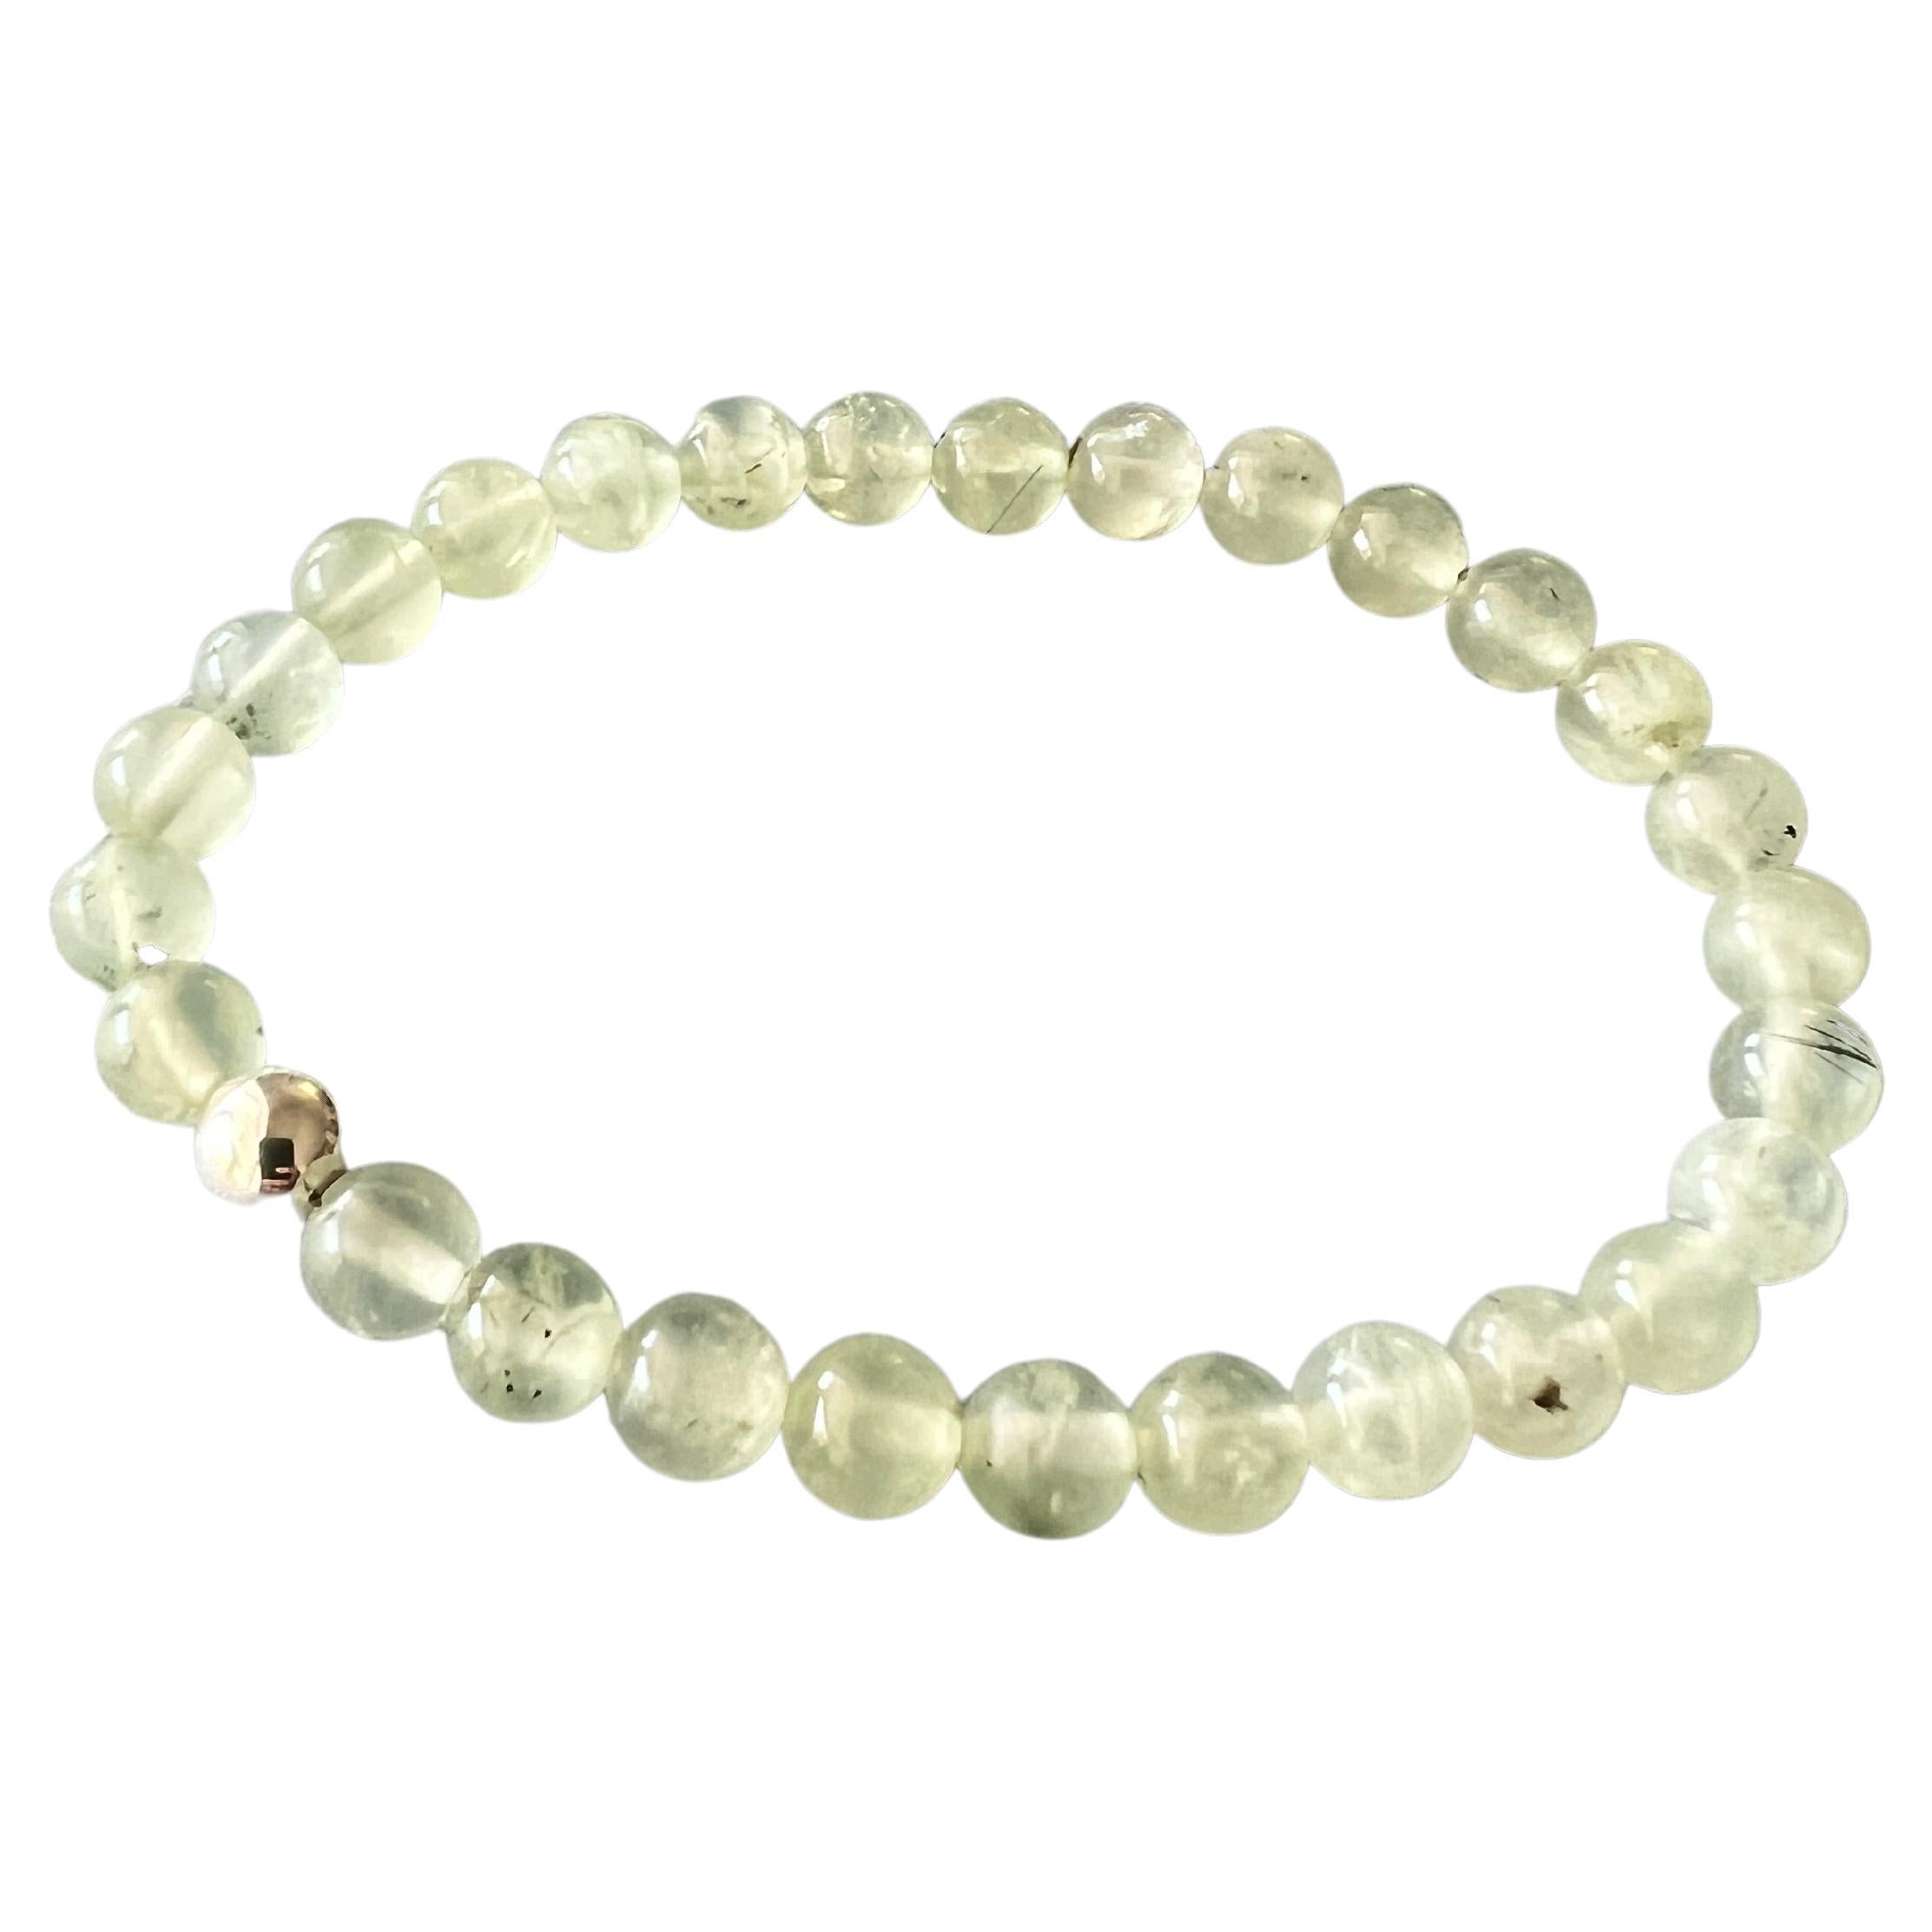 Green Prehnite Round Bead Stackable Elastic Bracelet with Silver Bead 

All Beads are the same size.

Made in Los Angeles

Designer: J Dauphin

The Prehnite Round Bead Bracelet is a blend of natural beauty and potent symbolism, rooted in the